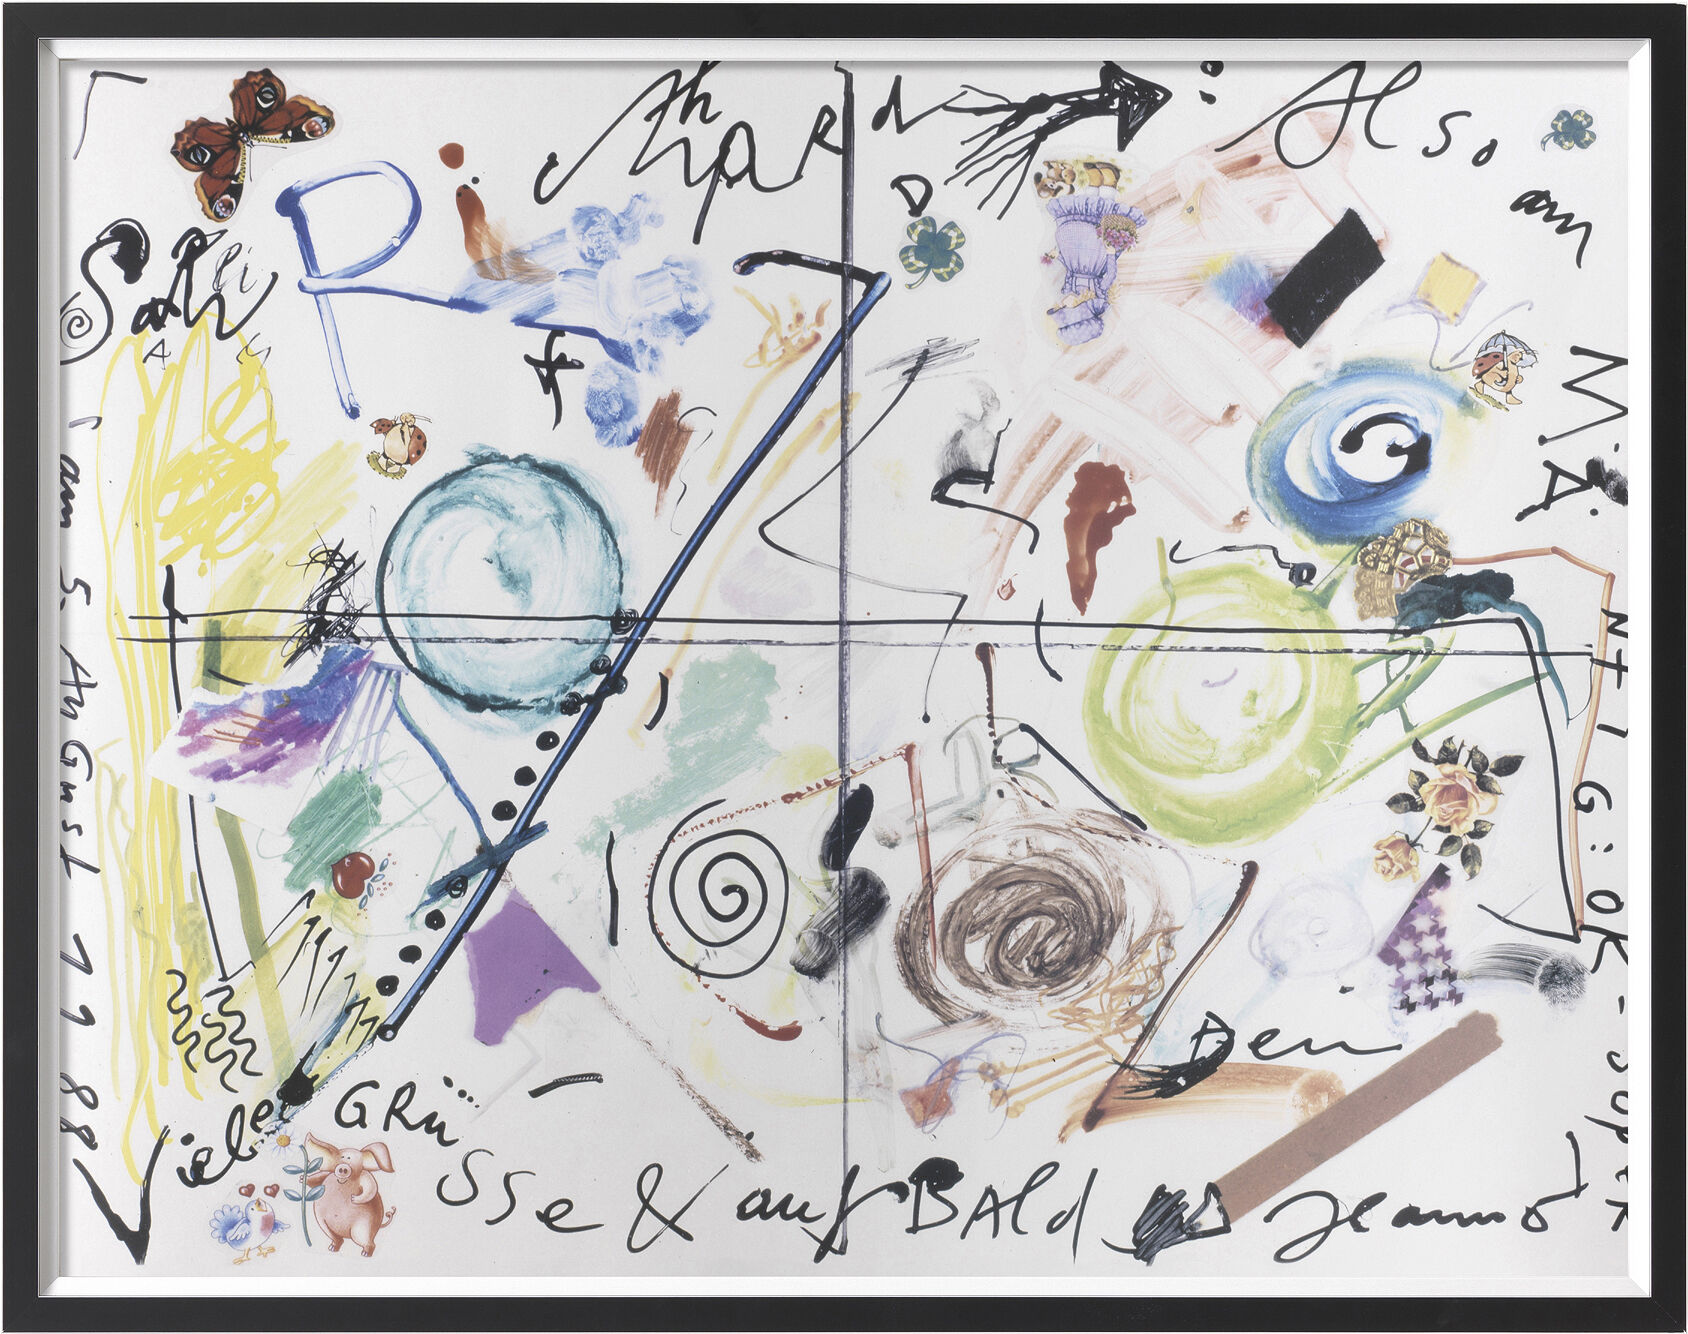 Picture "Salü Richard" (1988), framed by Jean Tinguely